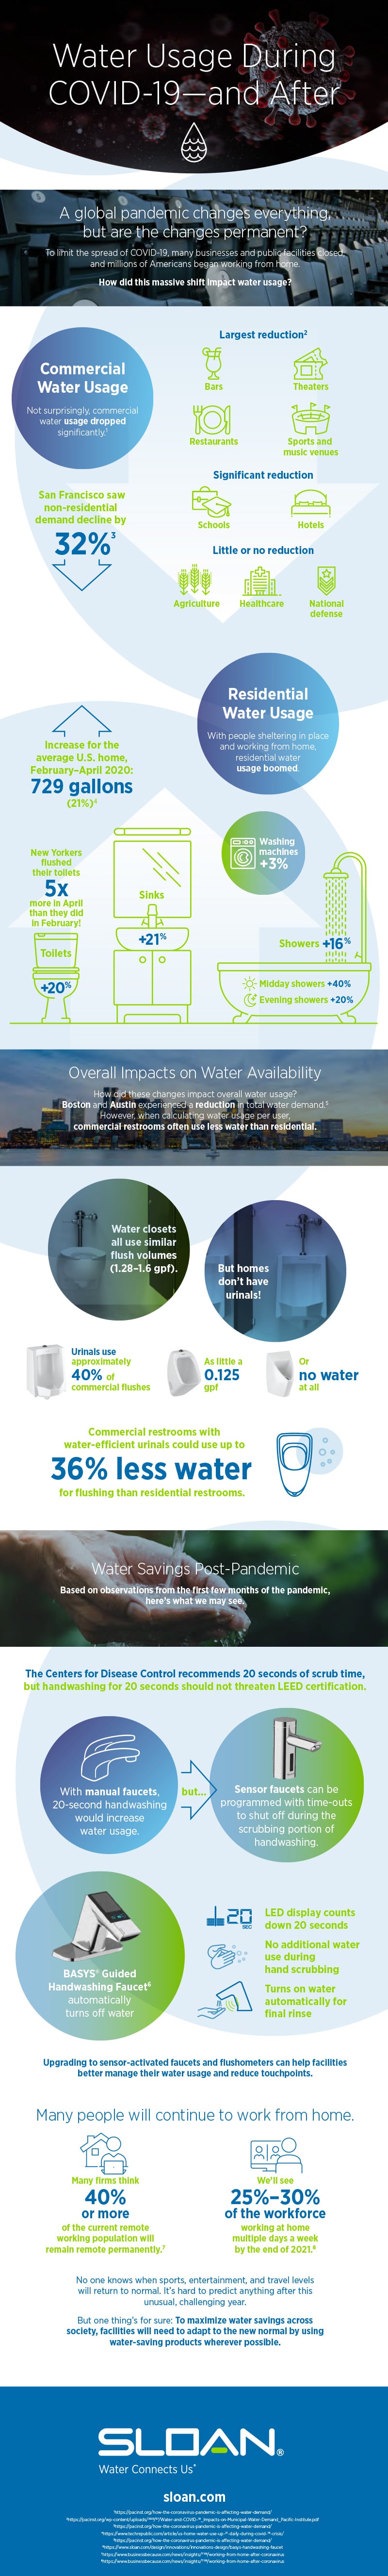 Covid-19 Water Usage Infographic